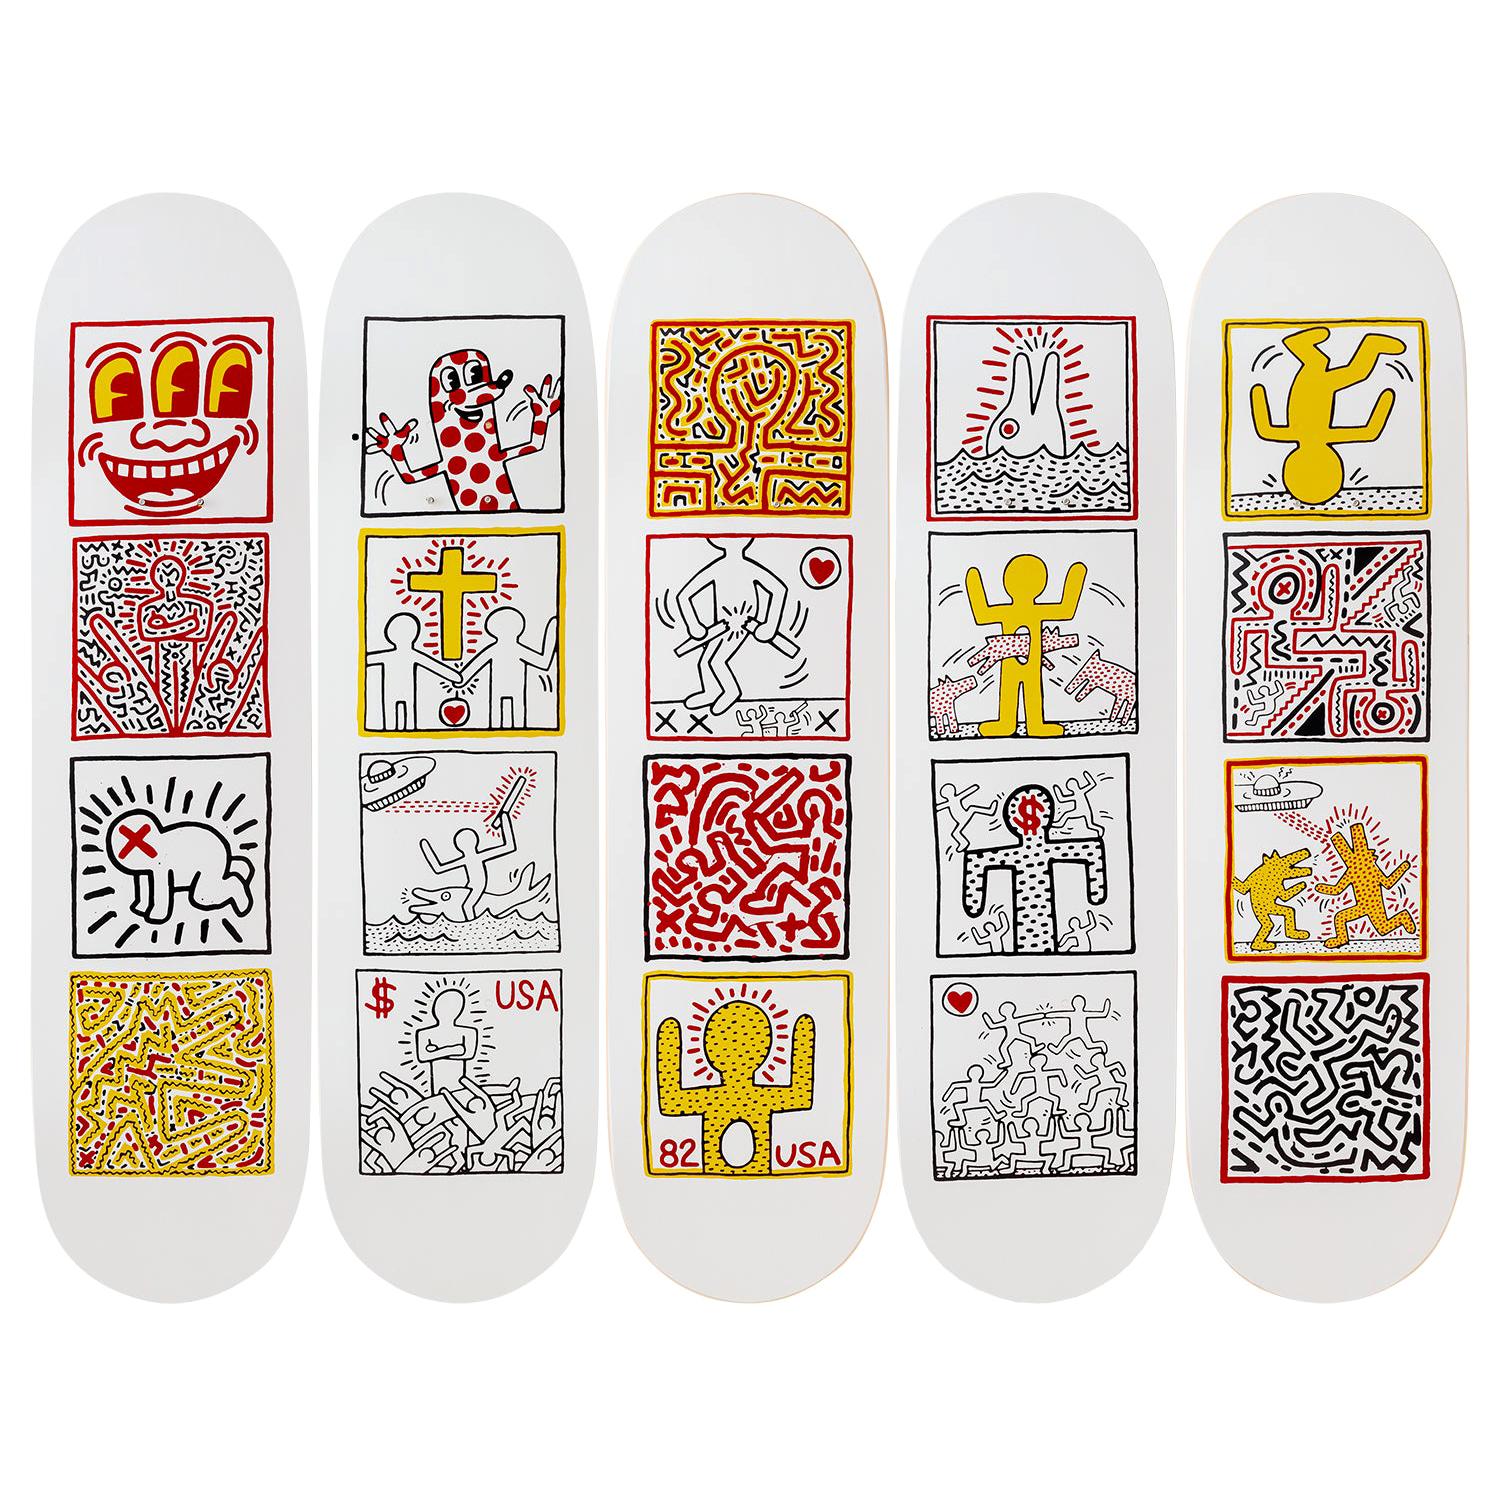 One Man Show Skateboard Decks after Keith Haring